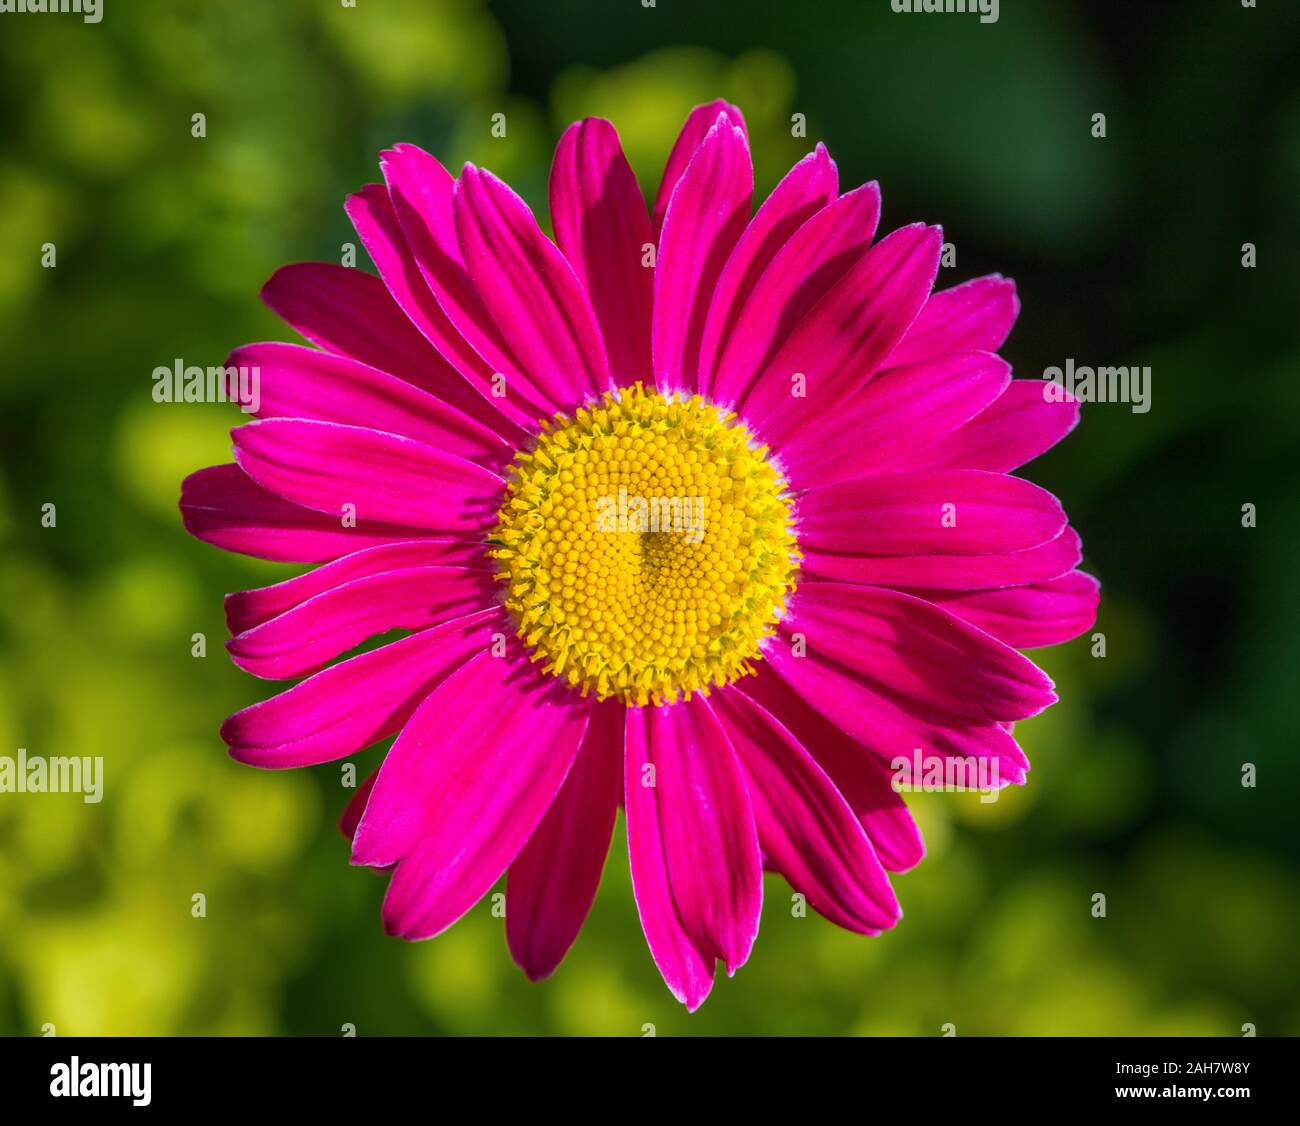 Beautiful pink flowers pyrethrum daisy on a green background. Feverfew, painted daisy. Medicinal plant. Close up macro. Top view. Stock Photo